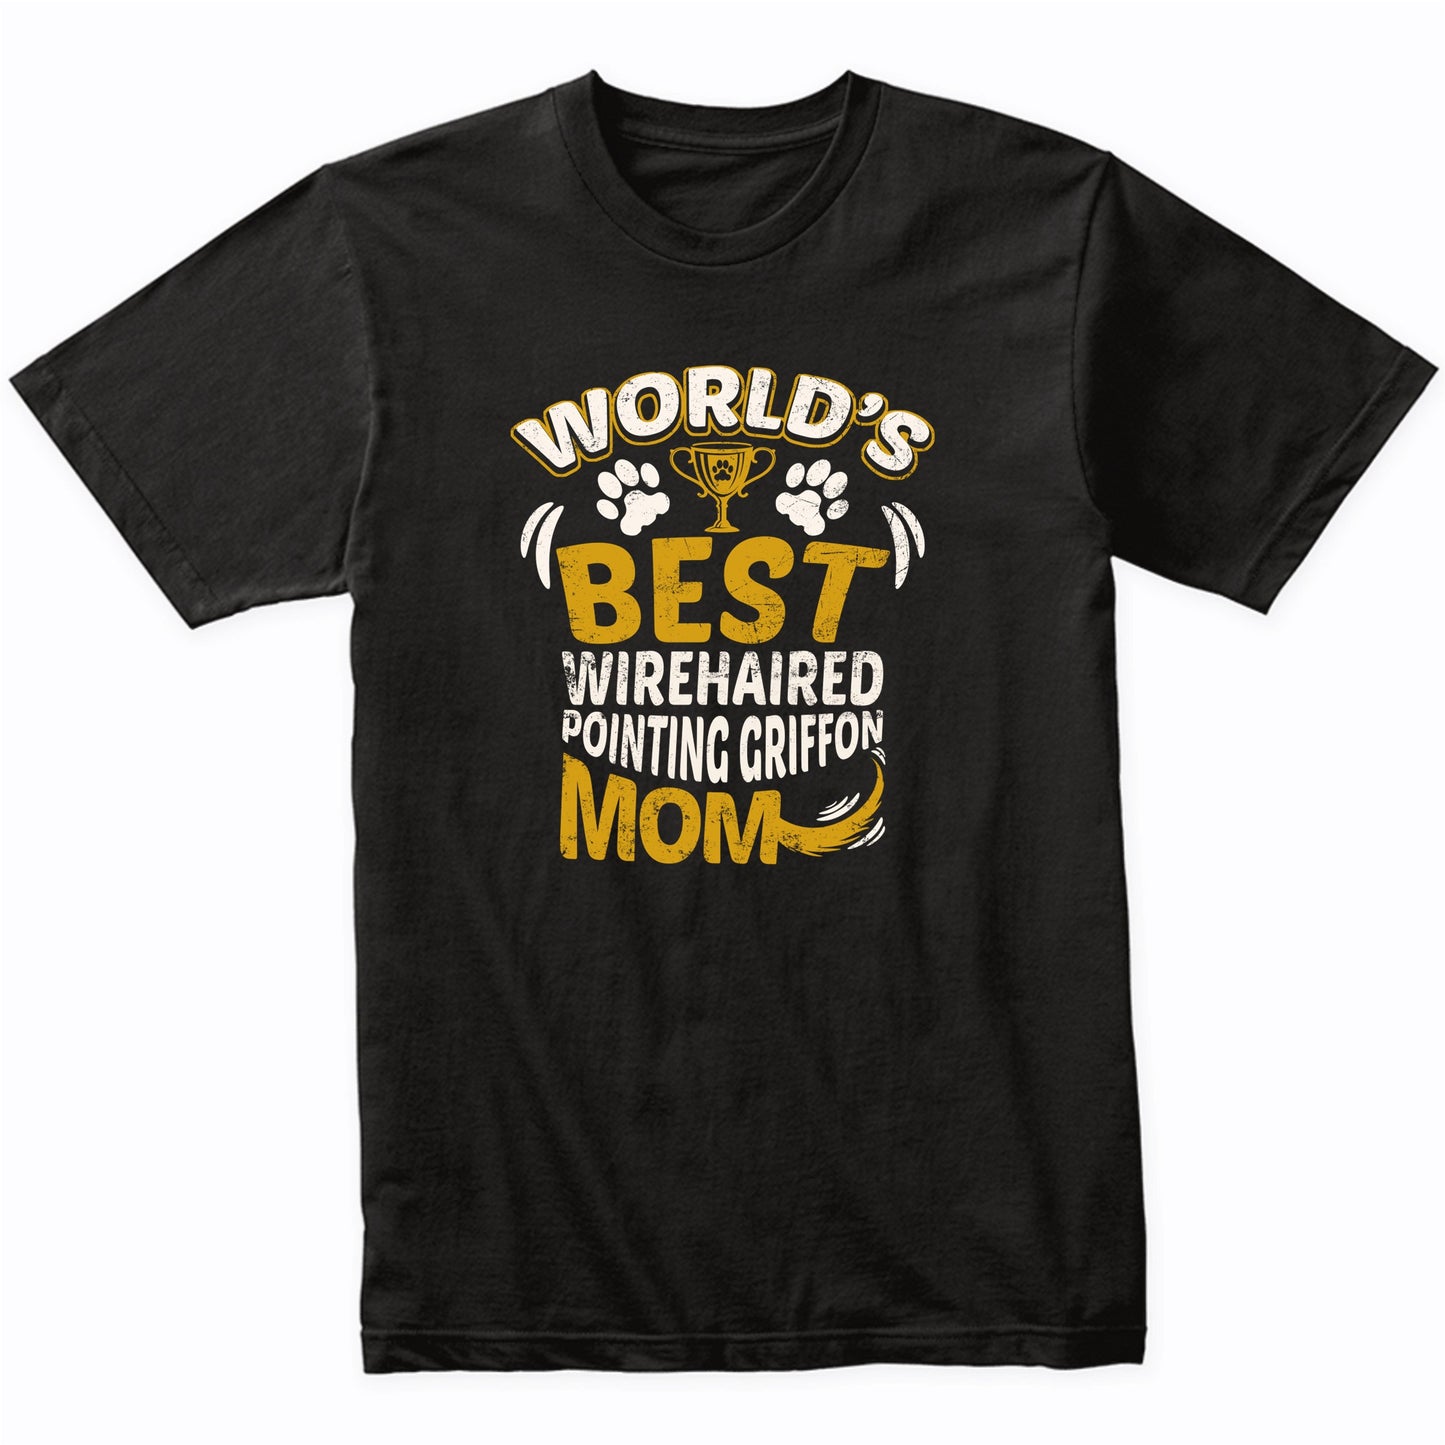 World's Best Wirehaired Pointing Griffon Mom Graphic T-Shirt